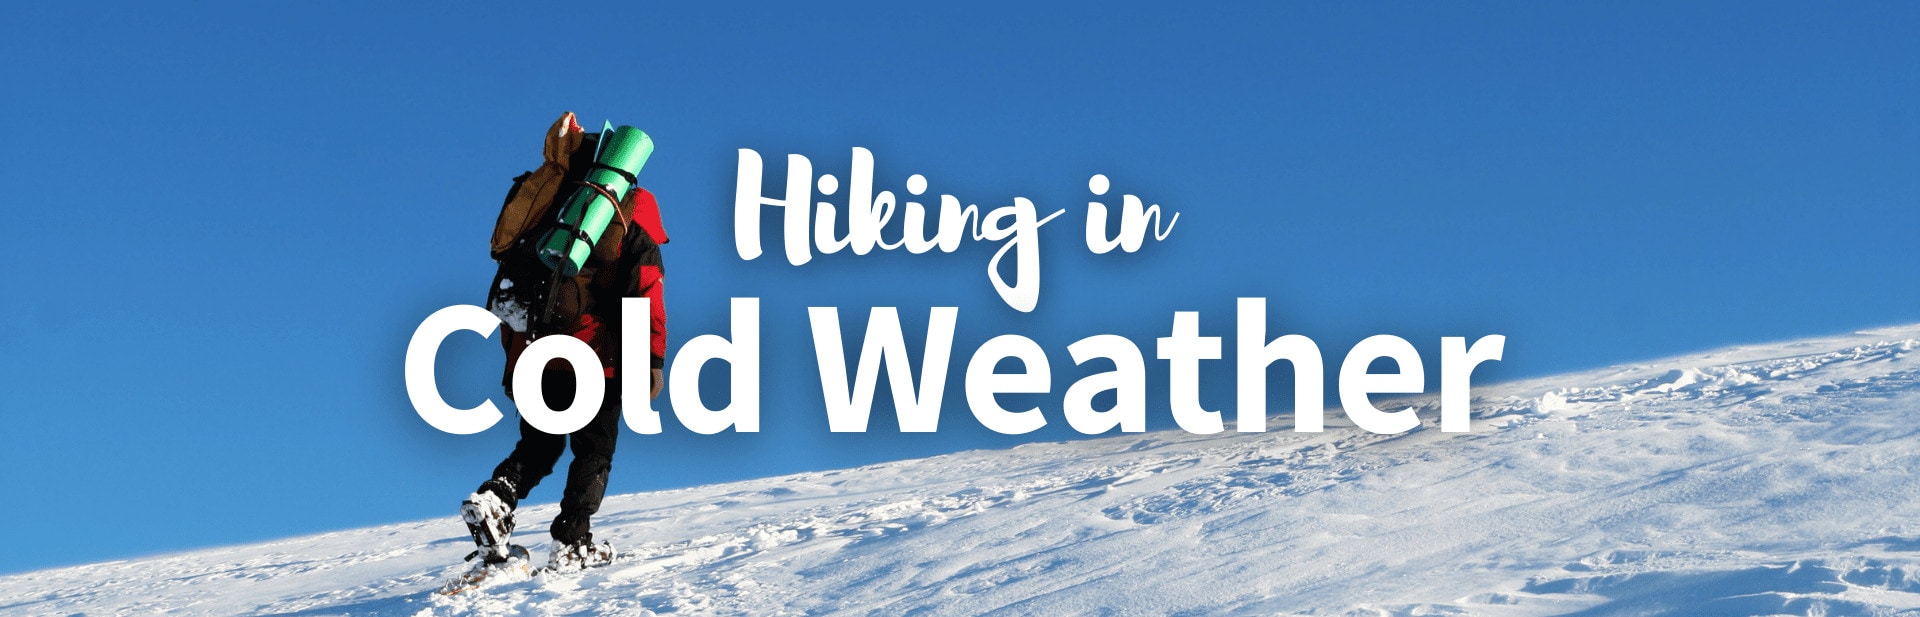 Cold Weather Hiking: How To Keep Hiking In The Snow and Cold Seasons